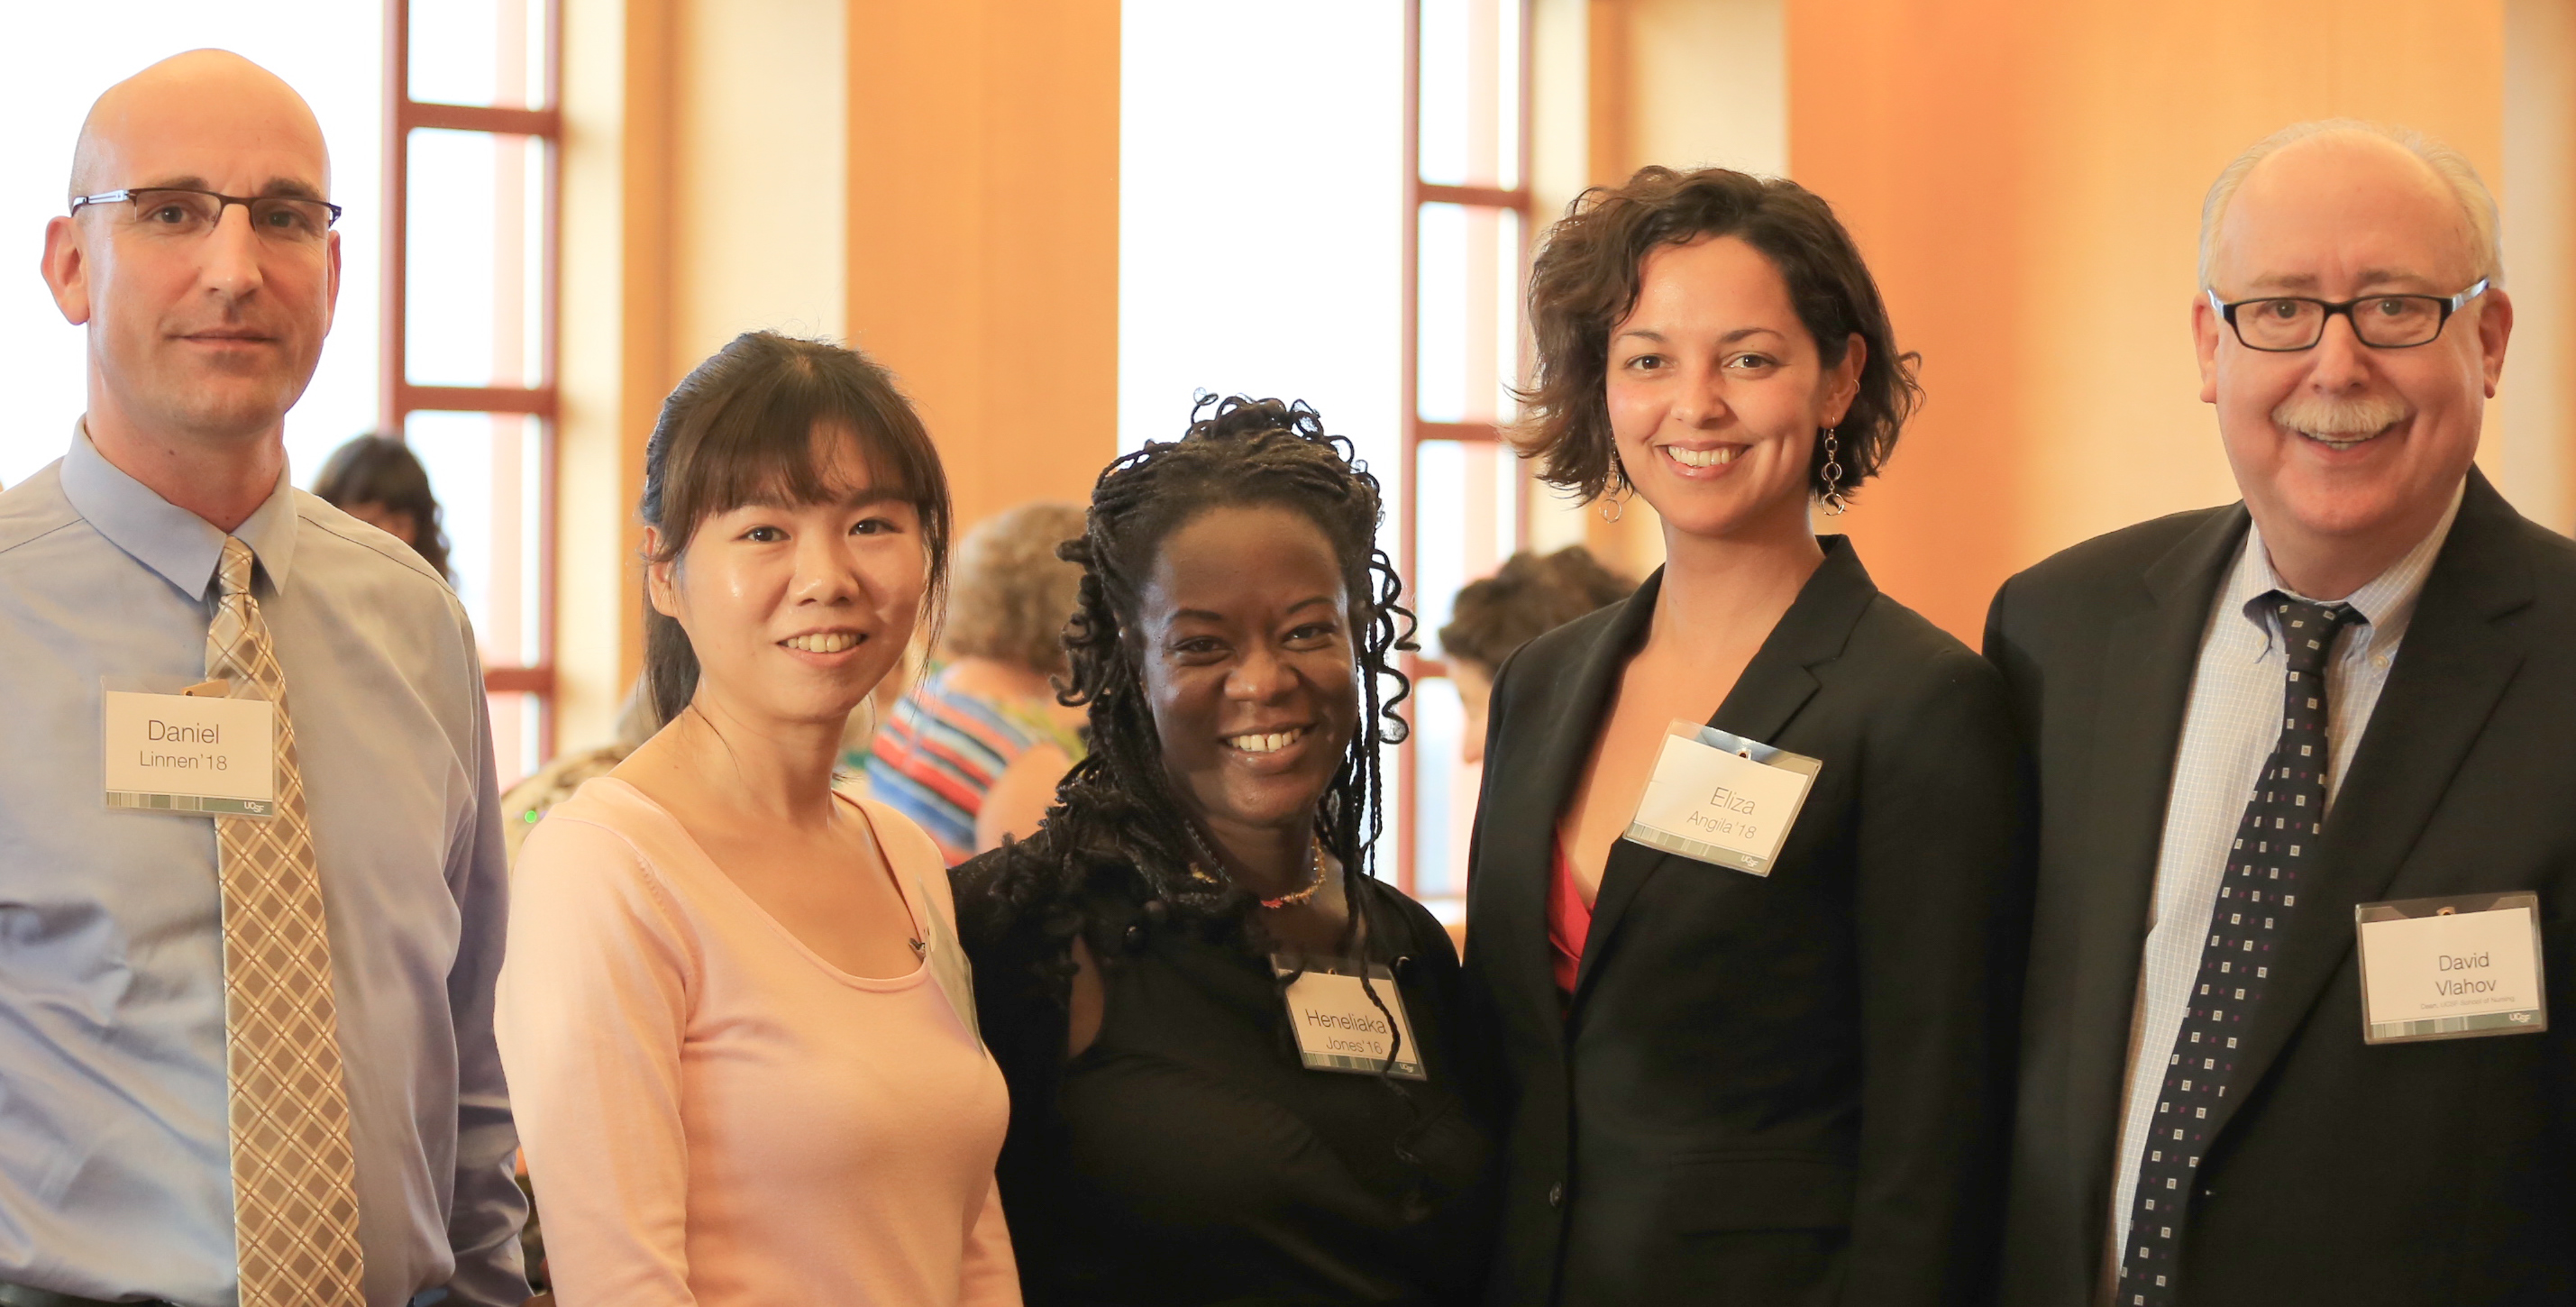 Students (left to right): Daniel Linnen, MS, RN, PhD(c), Han-Lin (Diane) Chi, RN, CNS, CHPN, PhD(c), Heneliaka Jones, RN, (current Masters) and Eliza Angila (current MEPN) pose with Dean David Vlahov 